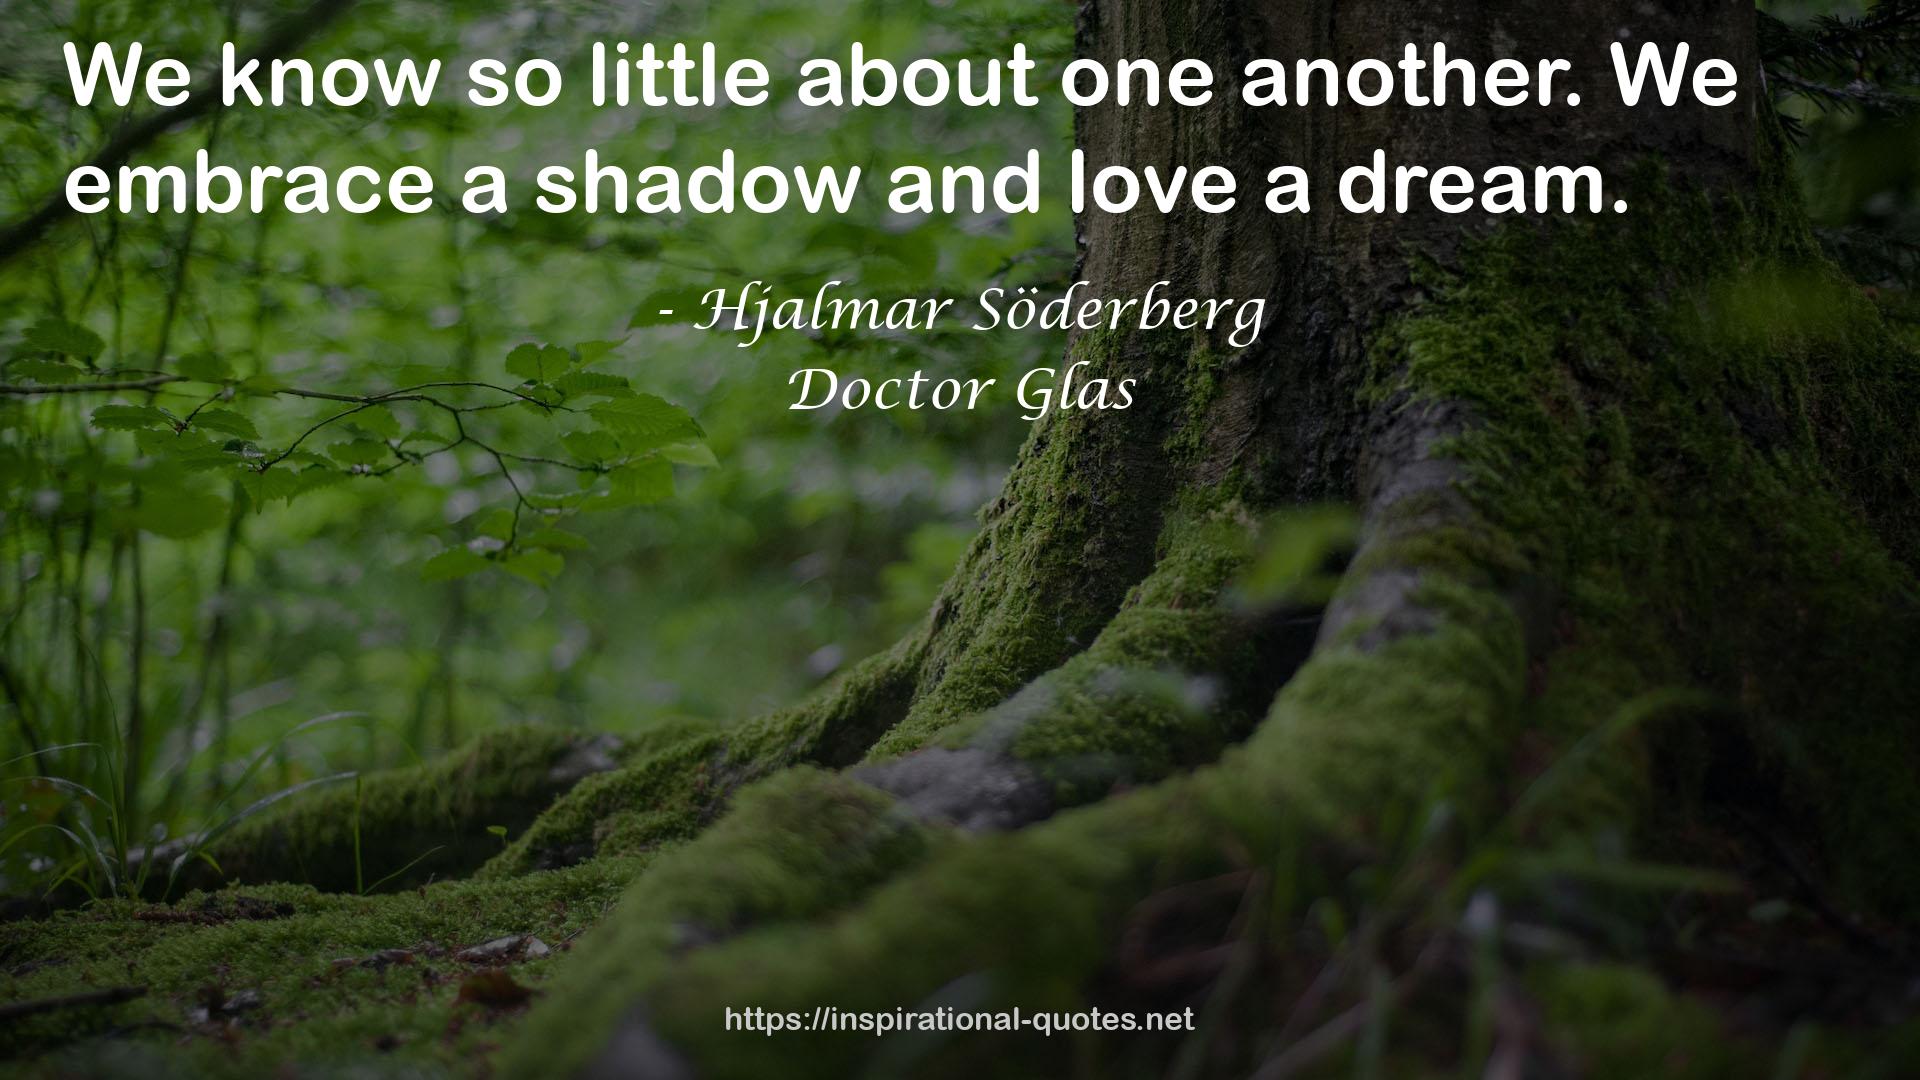 Doctor Glas QUOTES